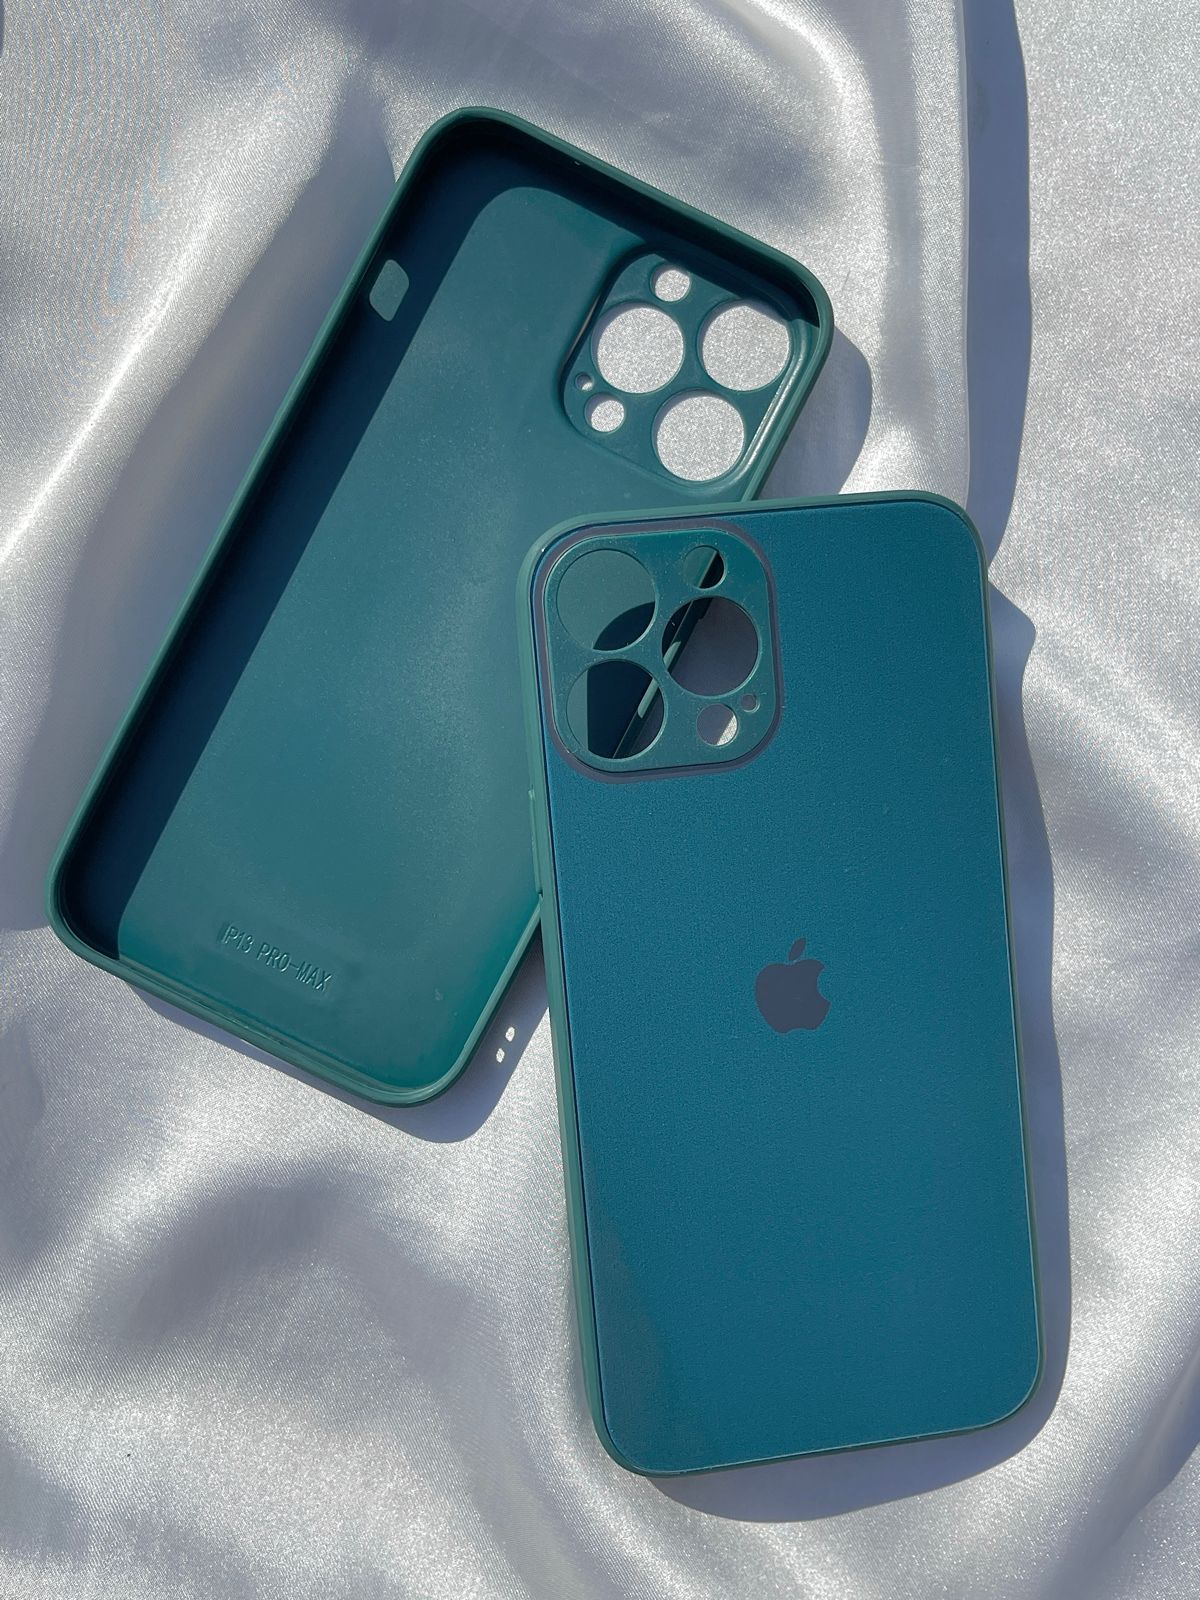 iPhone "13 Pro Max" Tempered Glass "Chrome" Case